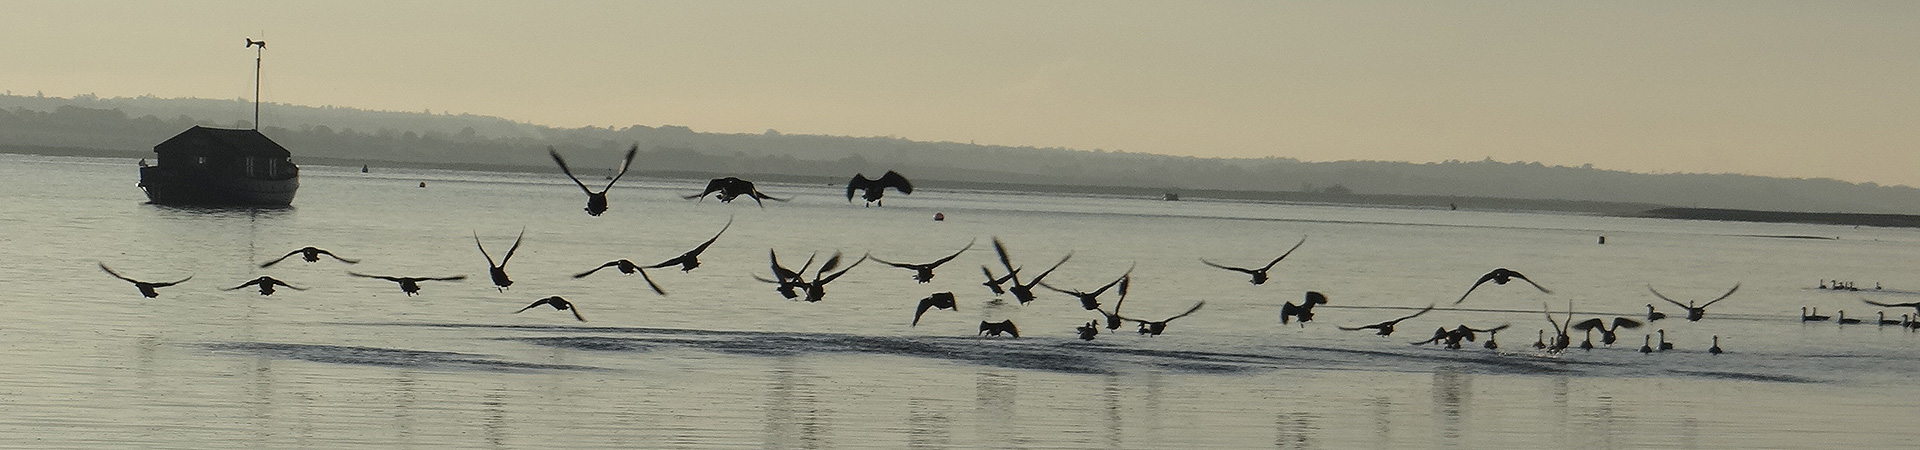 Brent Geese coming into land on the water in Blakeney Pit